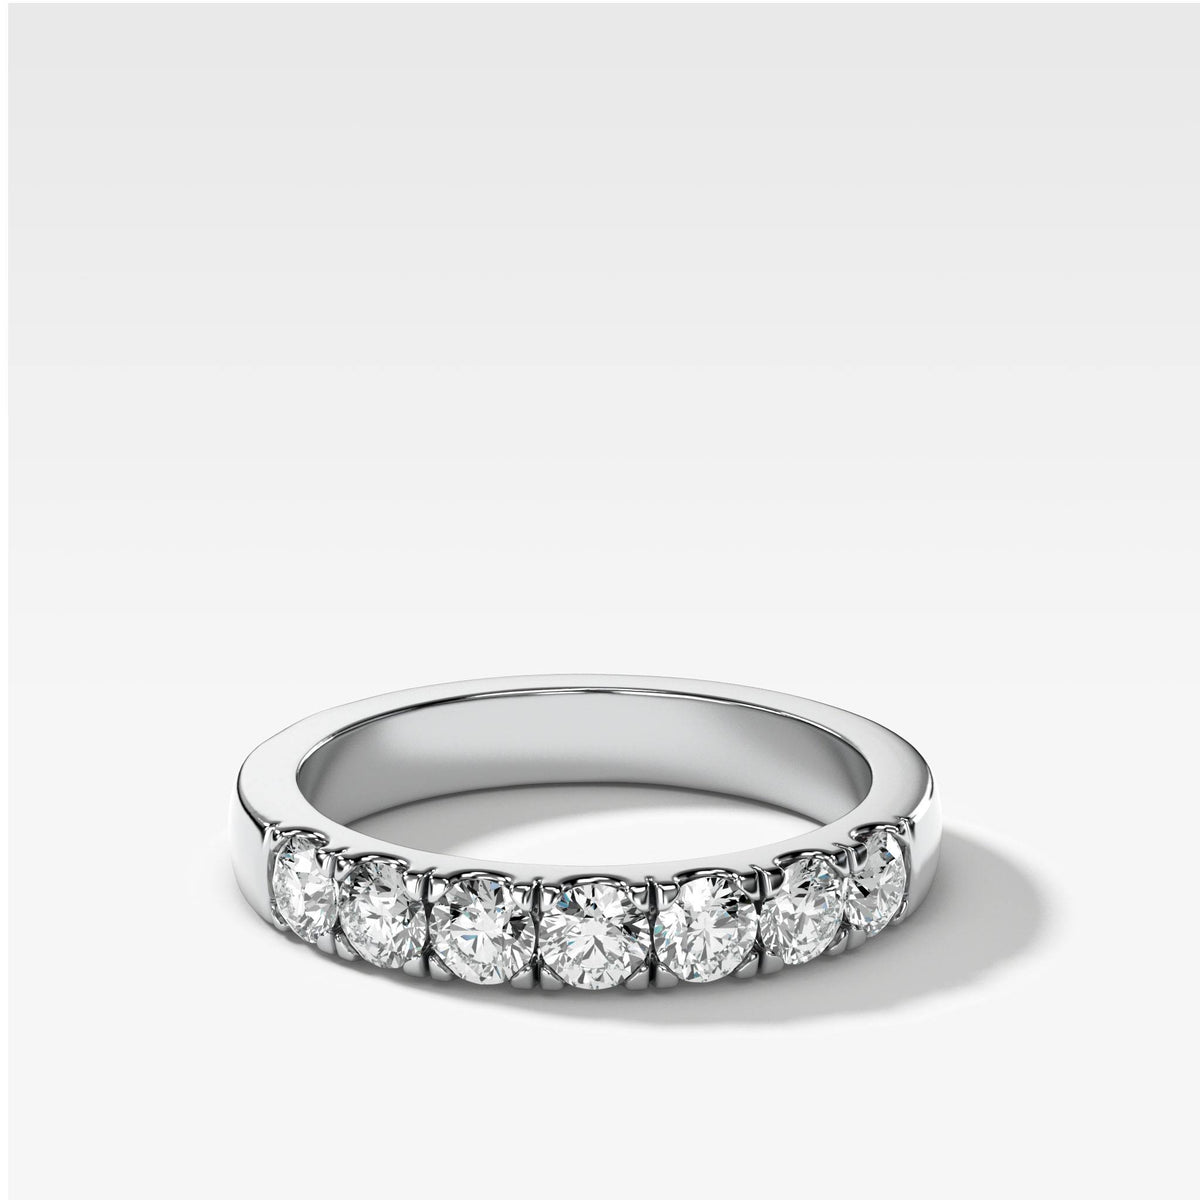 Jumbo Pavé Diamond Wedding Band by Good Stone available in Gold and Platinum